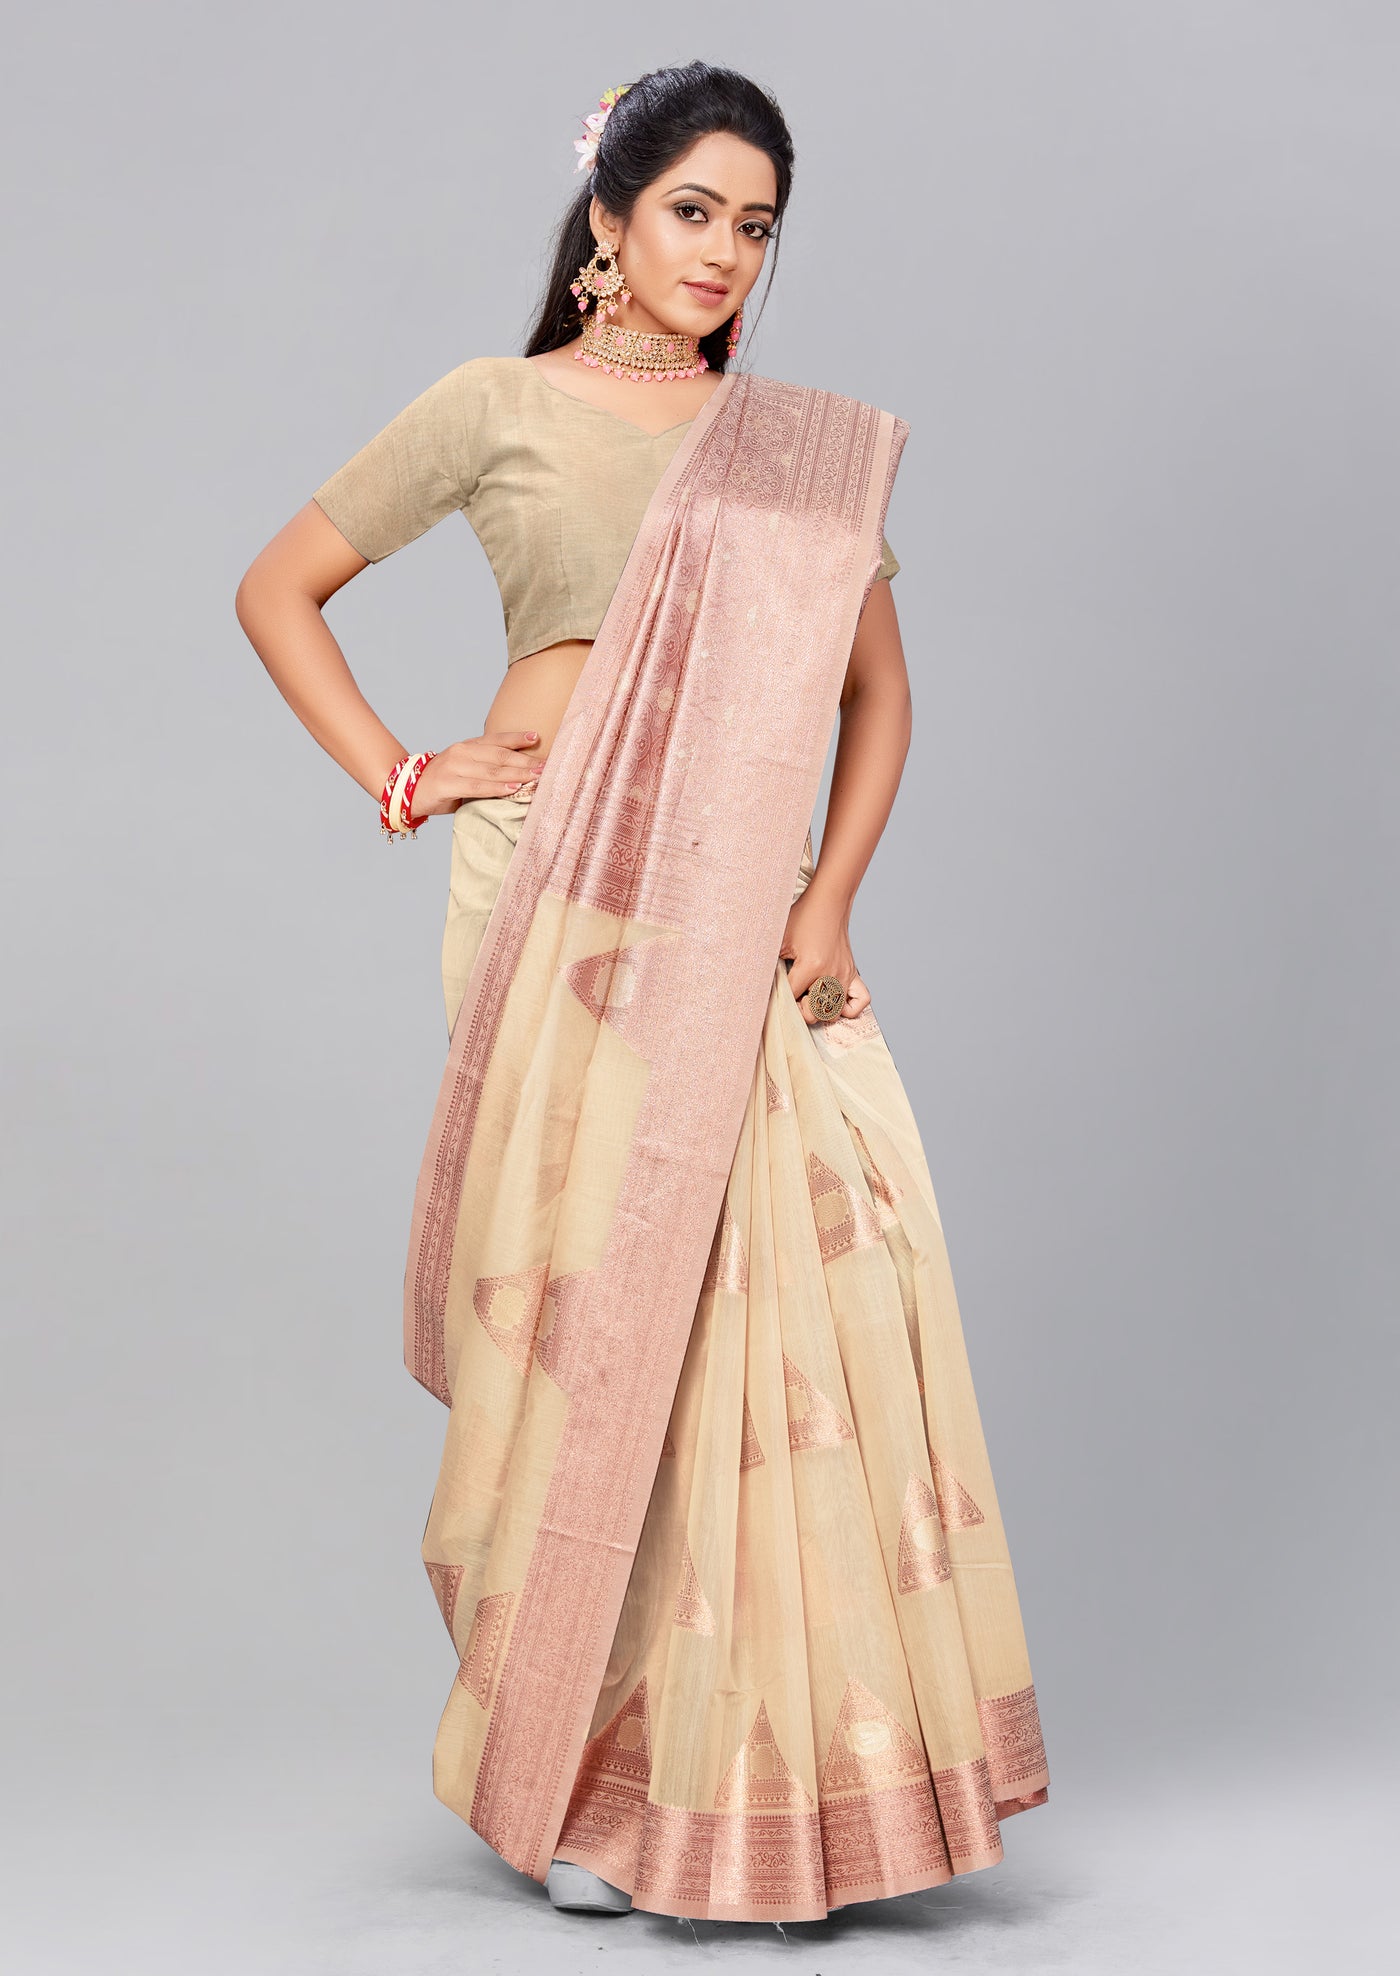 Bisque Handloom Saree - Indian Clothing in Denver, CO, Aurora, CO, Boulder, CO, Fort Collins, CO, Colorado Springs, CO, Parker, CO, Highlands Ranch, CO, Cherry Creek, CO, Centennial, CO, and Longmont, CO. Nationwide shipping USA - India Fashion X